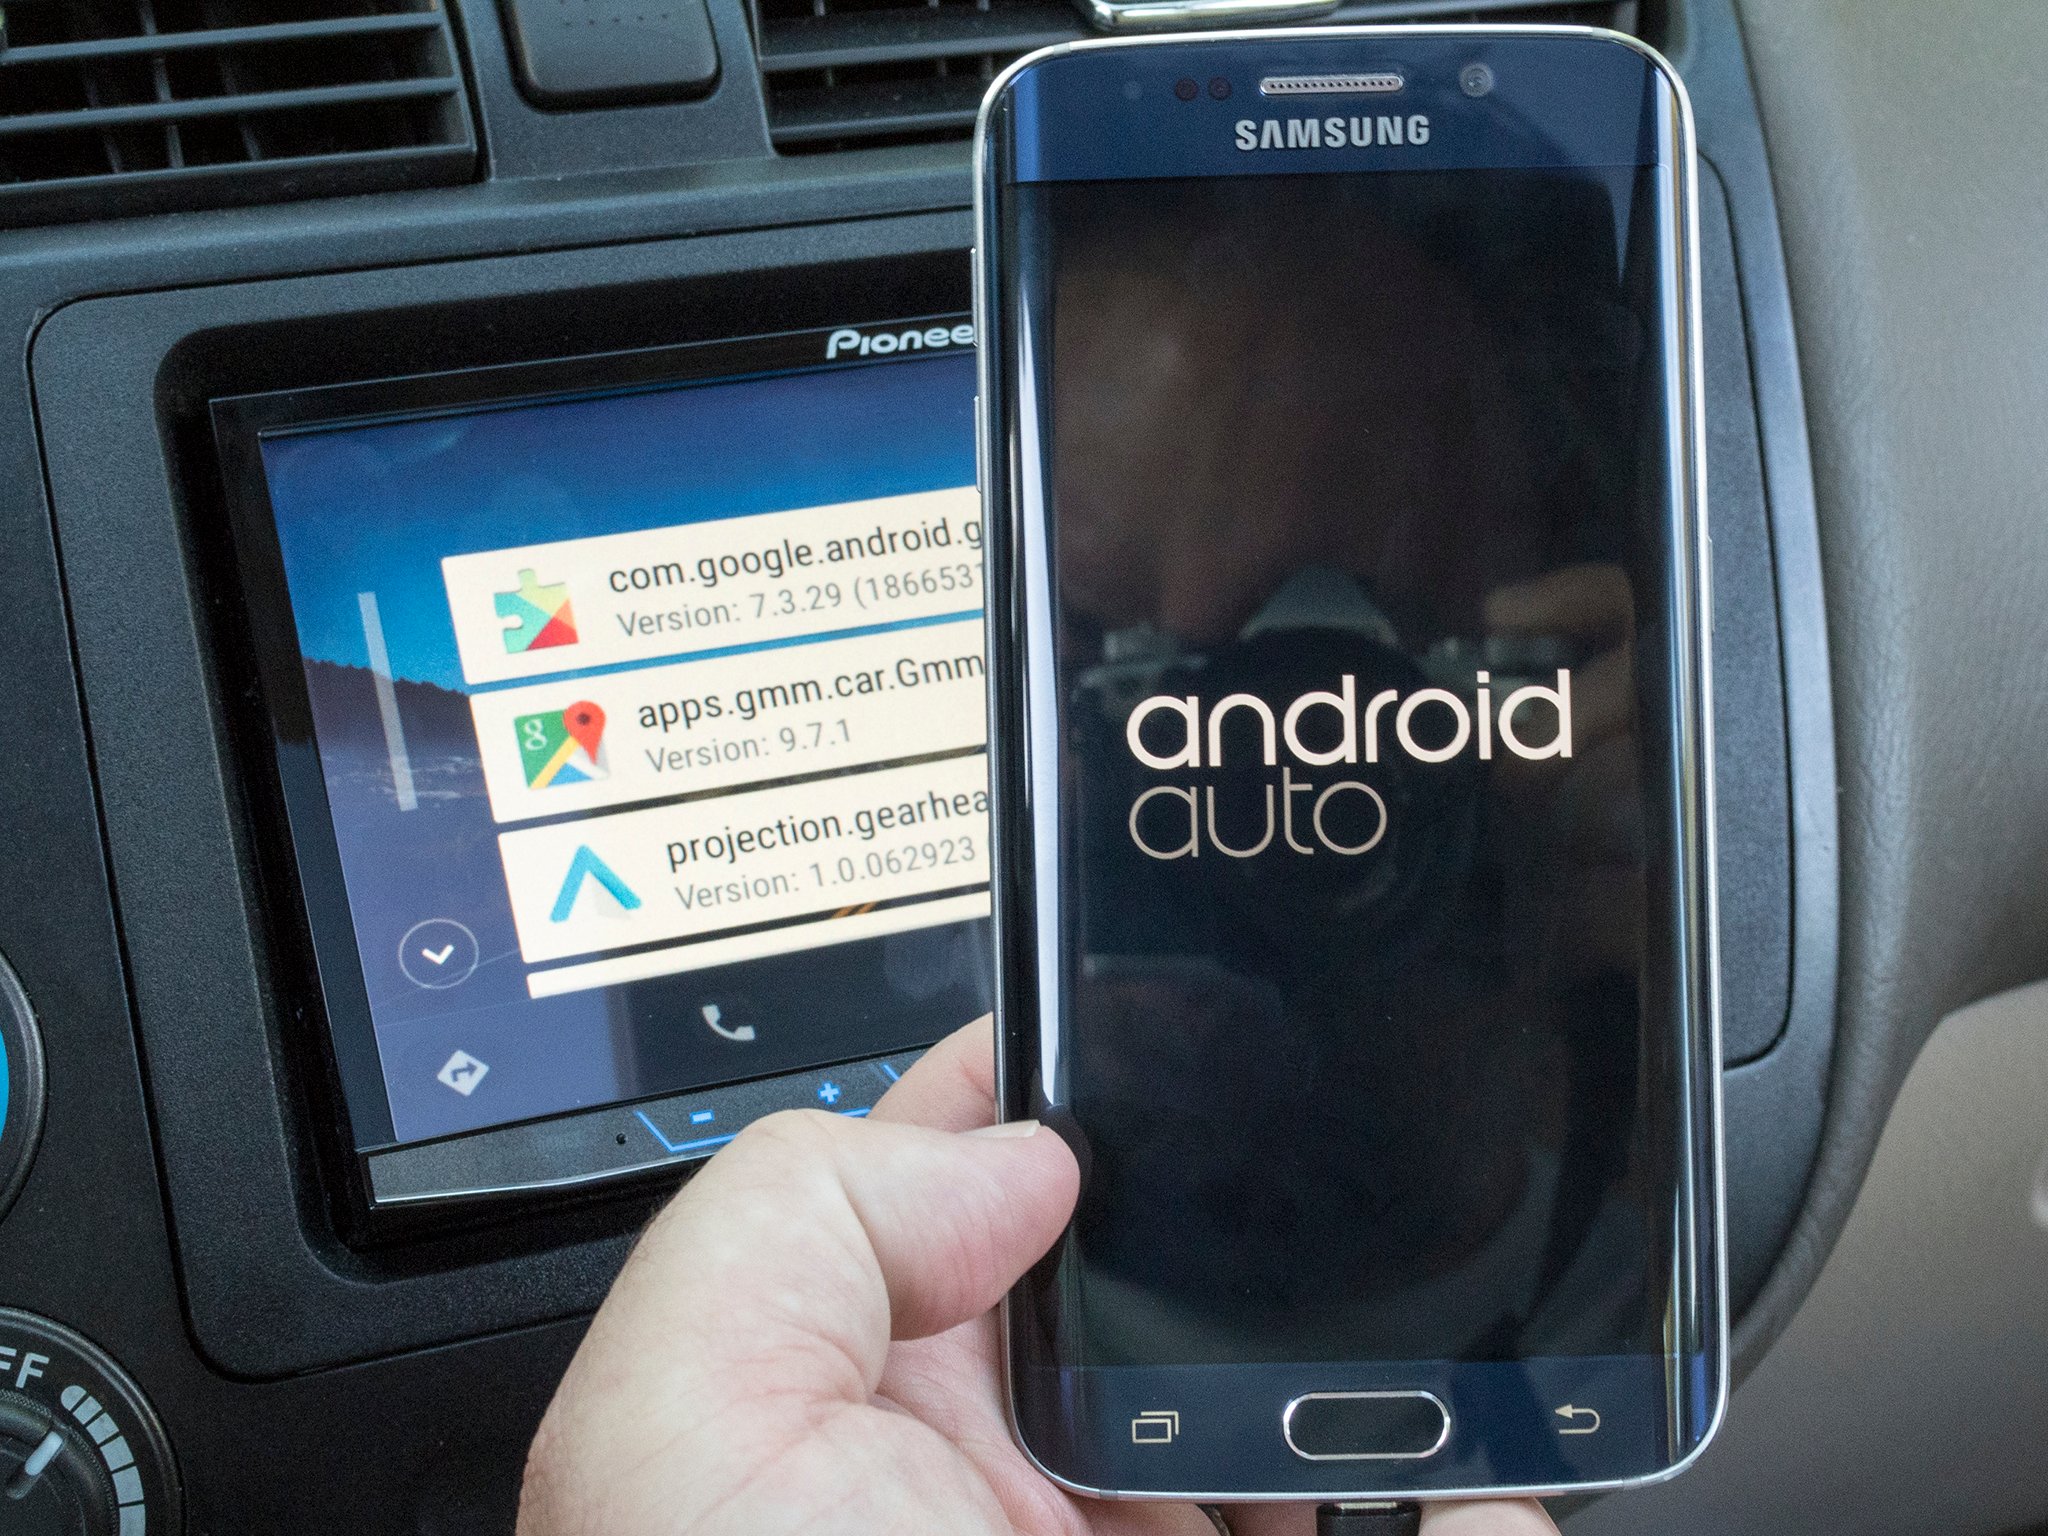 Samsung Galaxy S6 and Android Auto